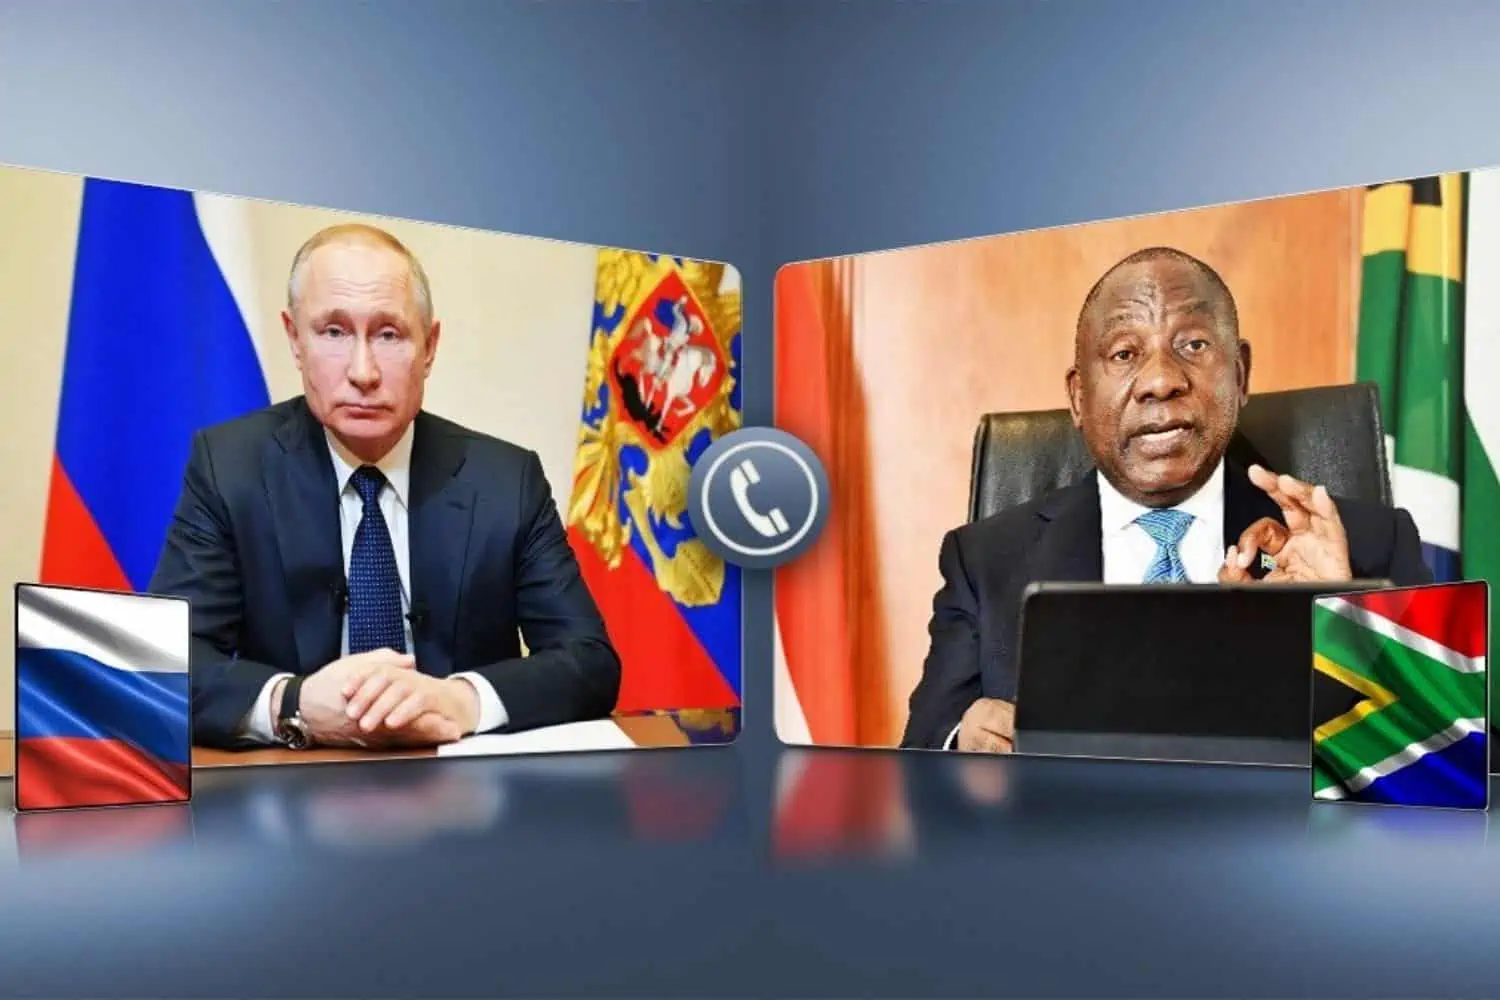 TODAY: Top News for 10 March 2022 - Ramaphosa speaks with Putin